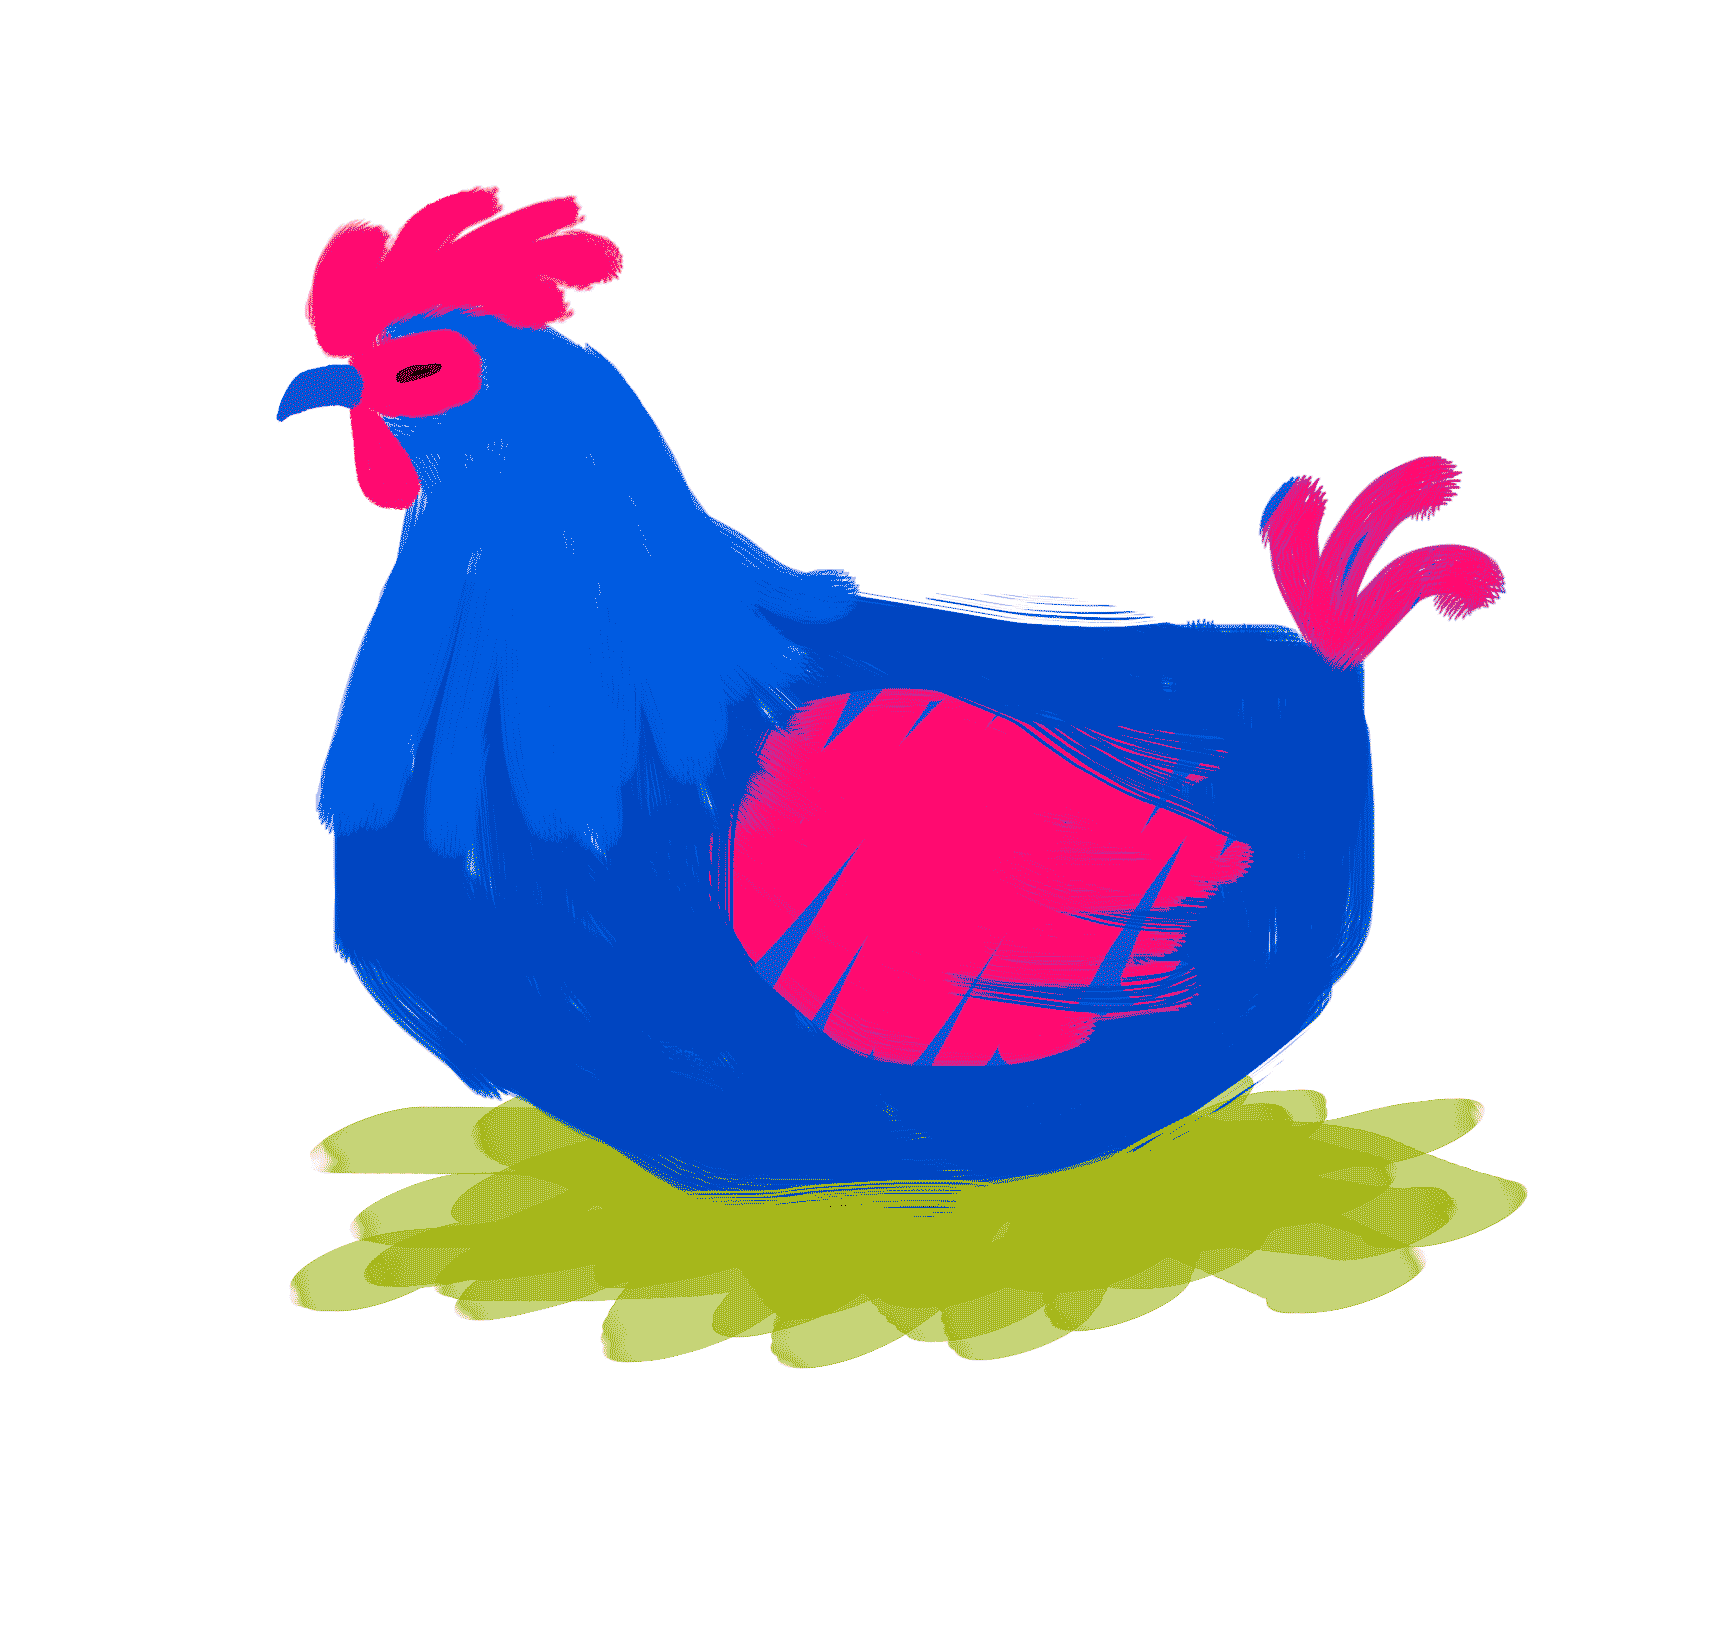 CHICKEN. Who came first? Personal project.